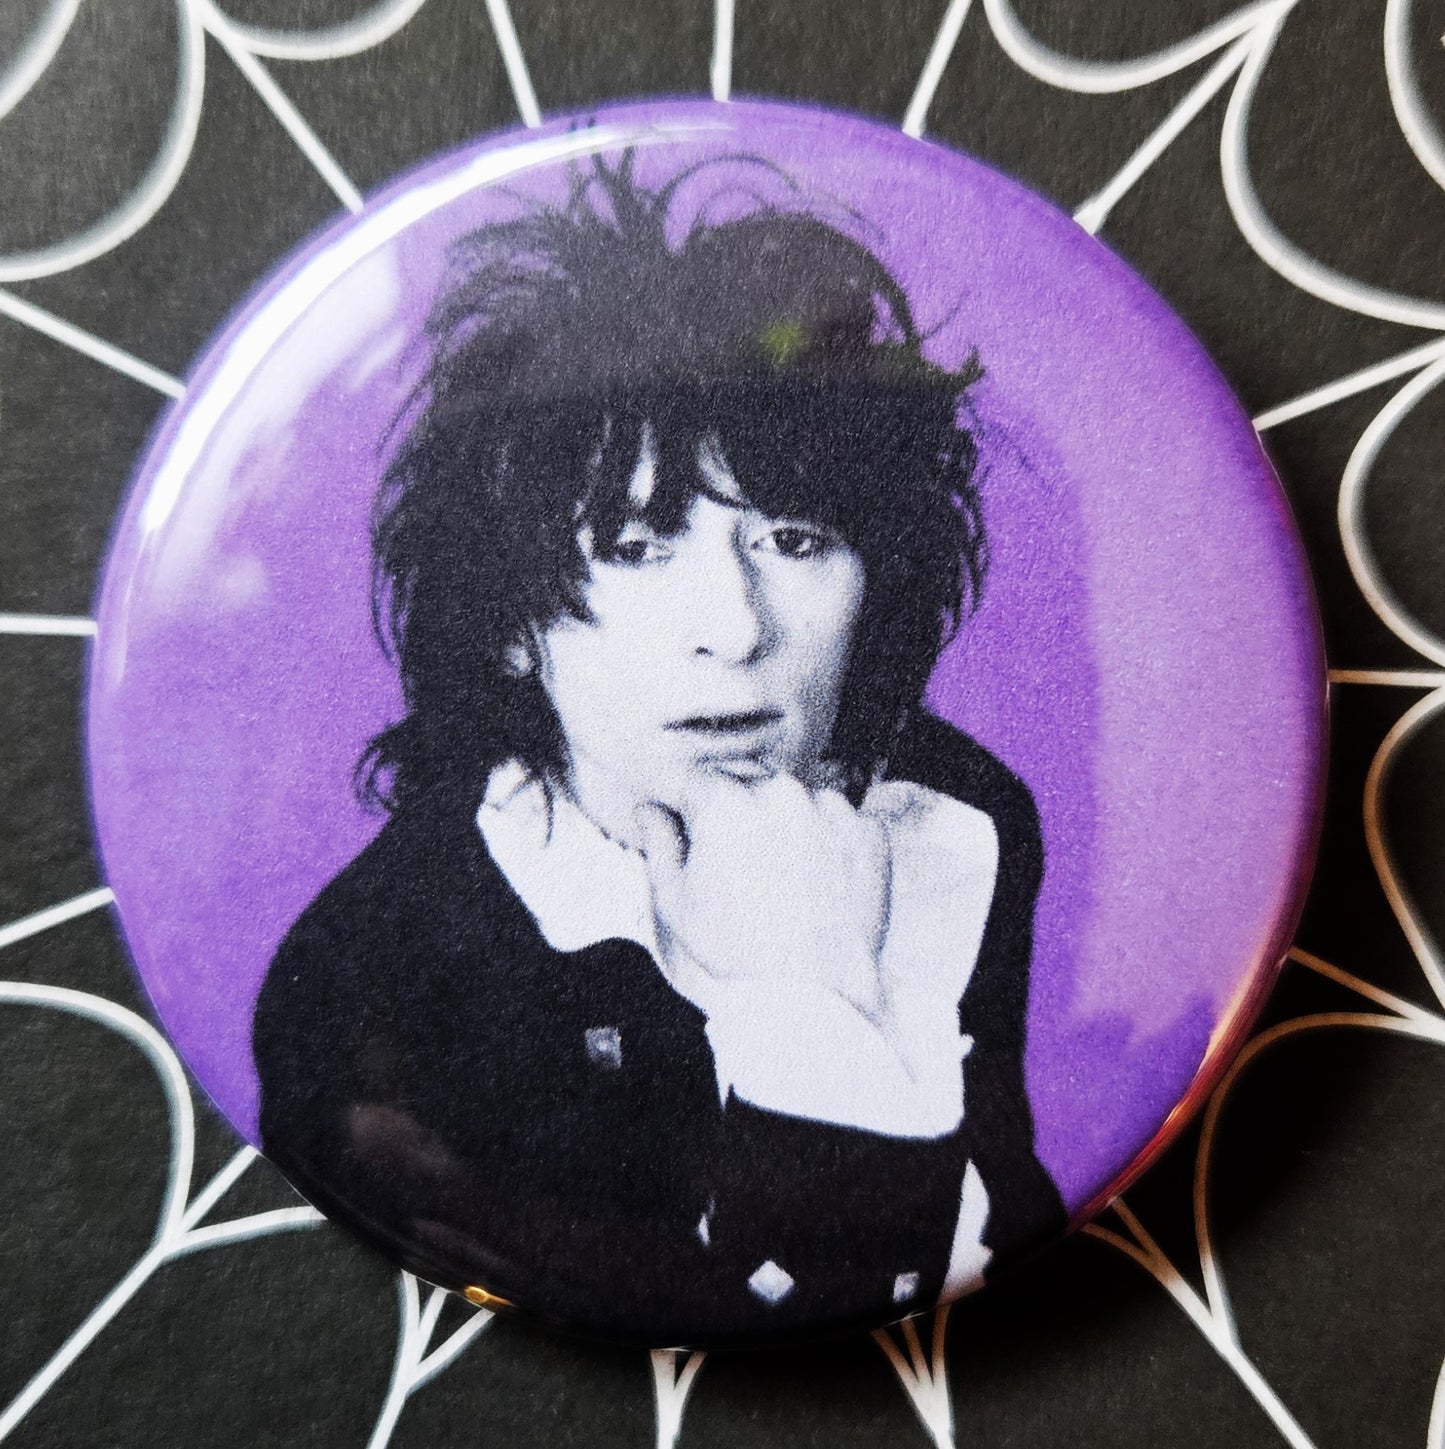 Johnny Thunders pinback Buttons & Bottle Openers.